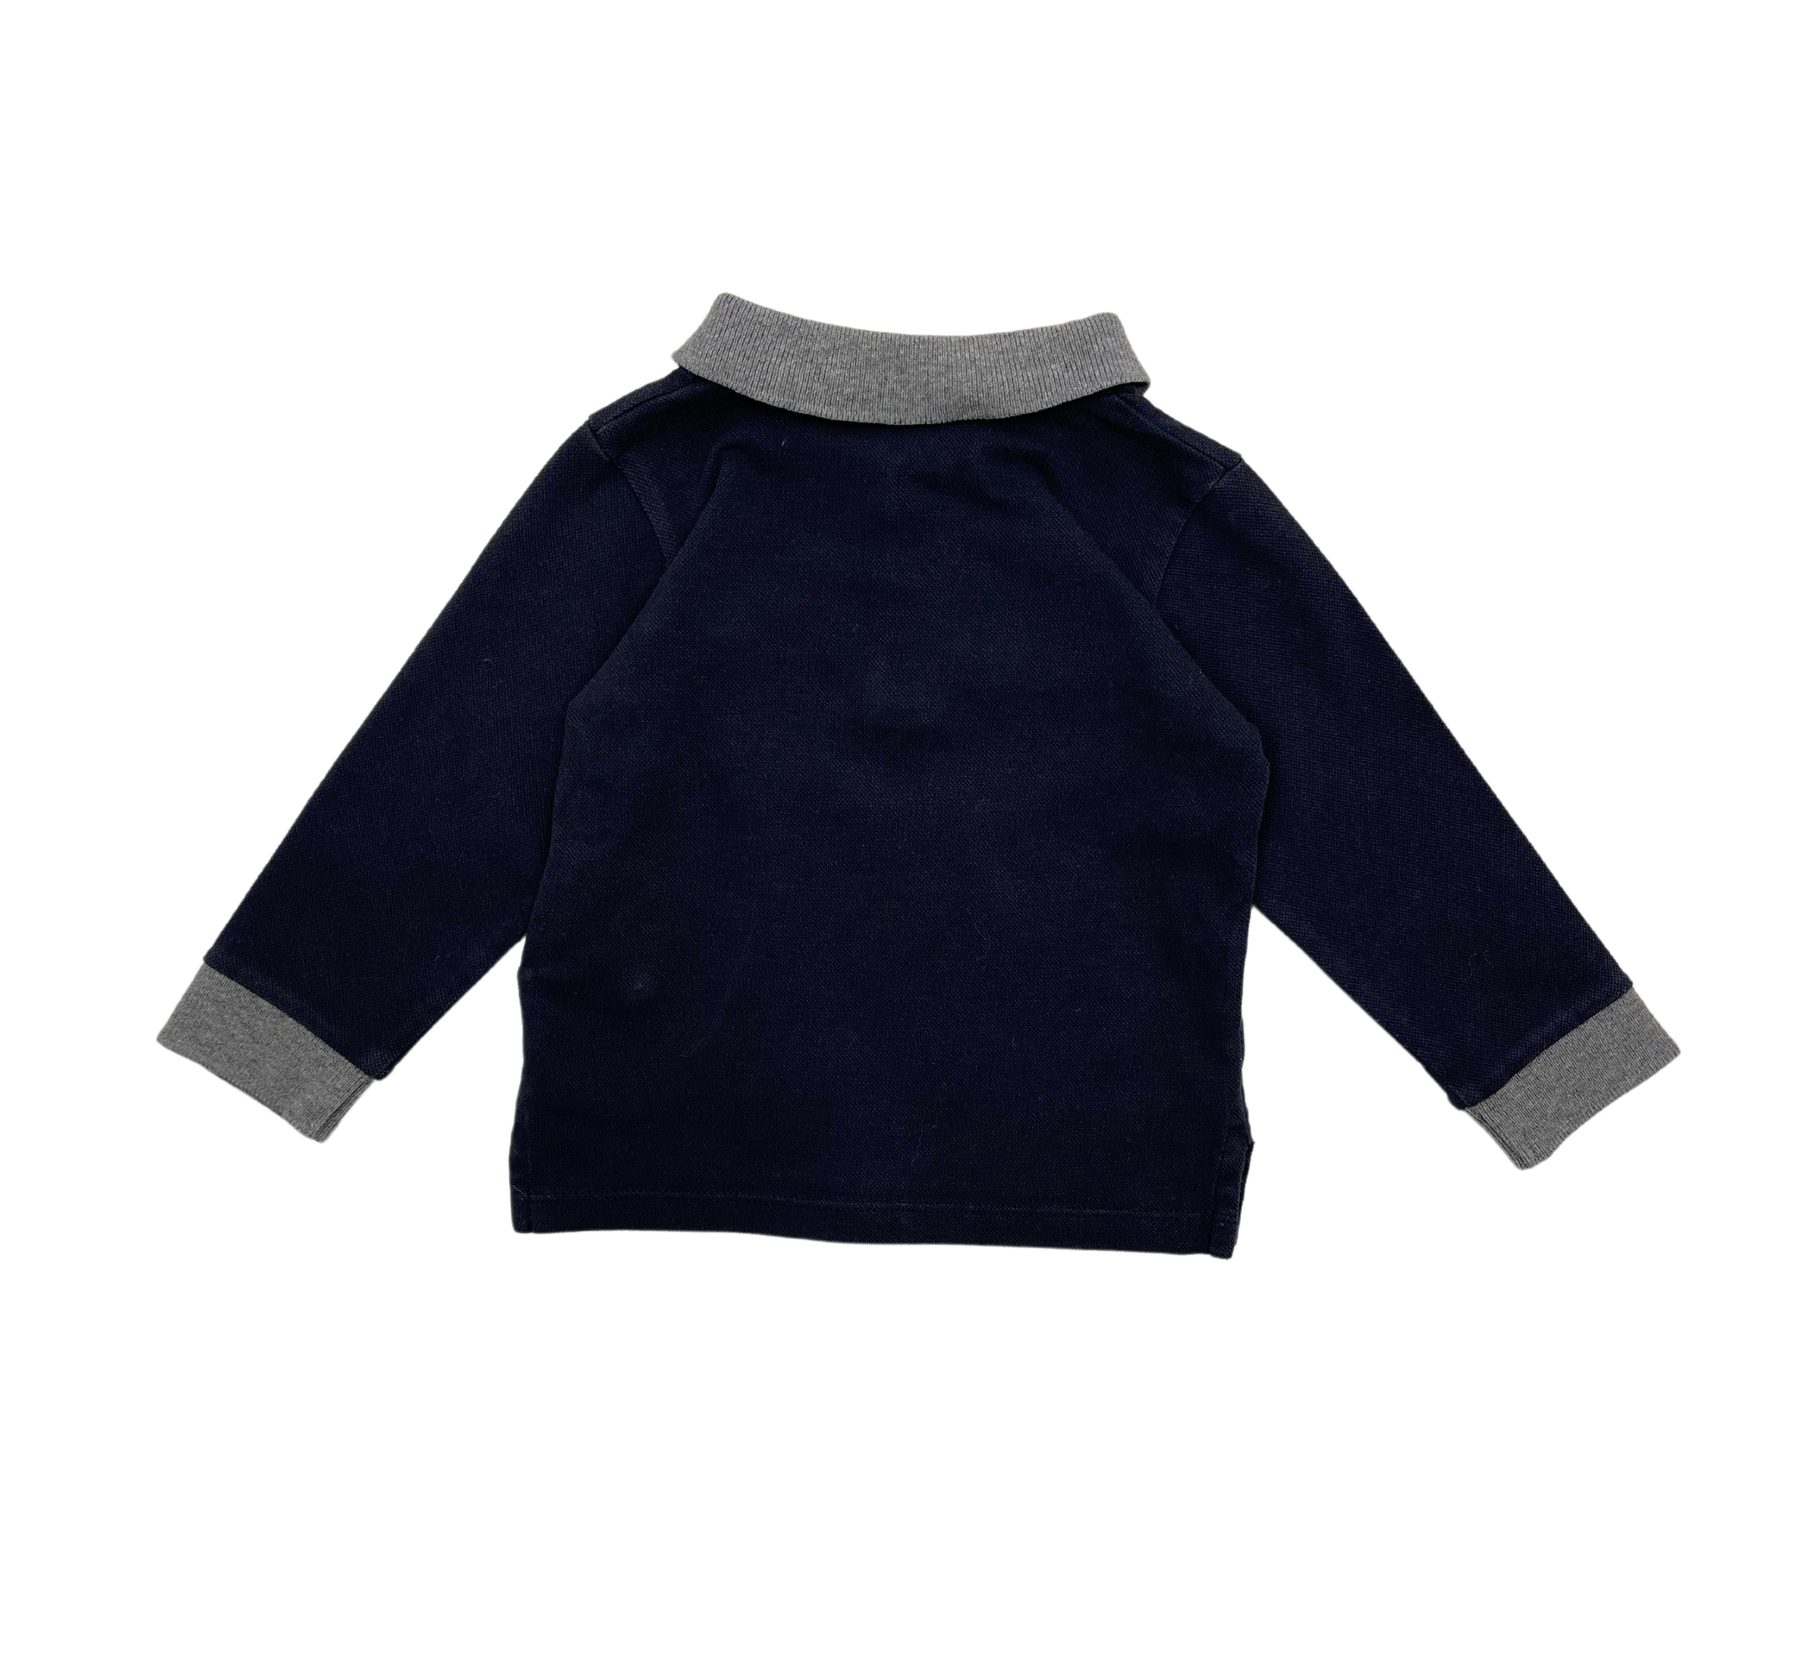 MONCLER - Navy blue polo shirt with gray collar - 6/9 months